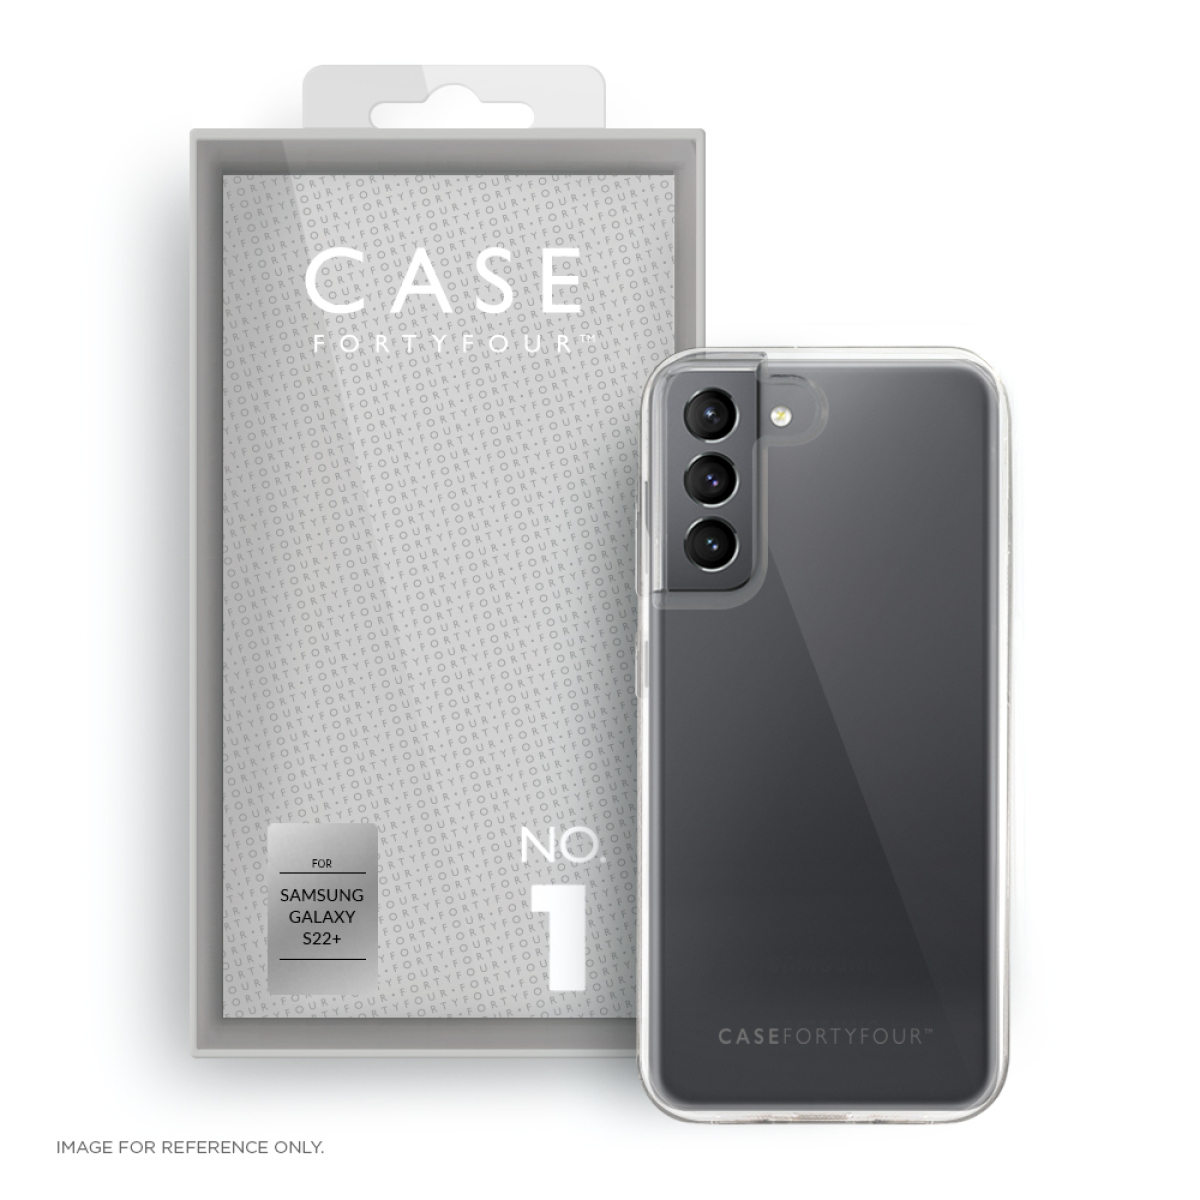 Case Galaxy Galaxy clear, S22+ No.1 Samsung, available Full Cover, 44 Not S22+,